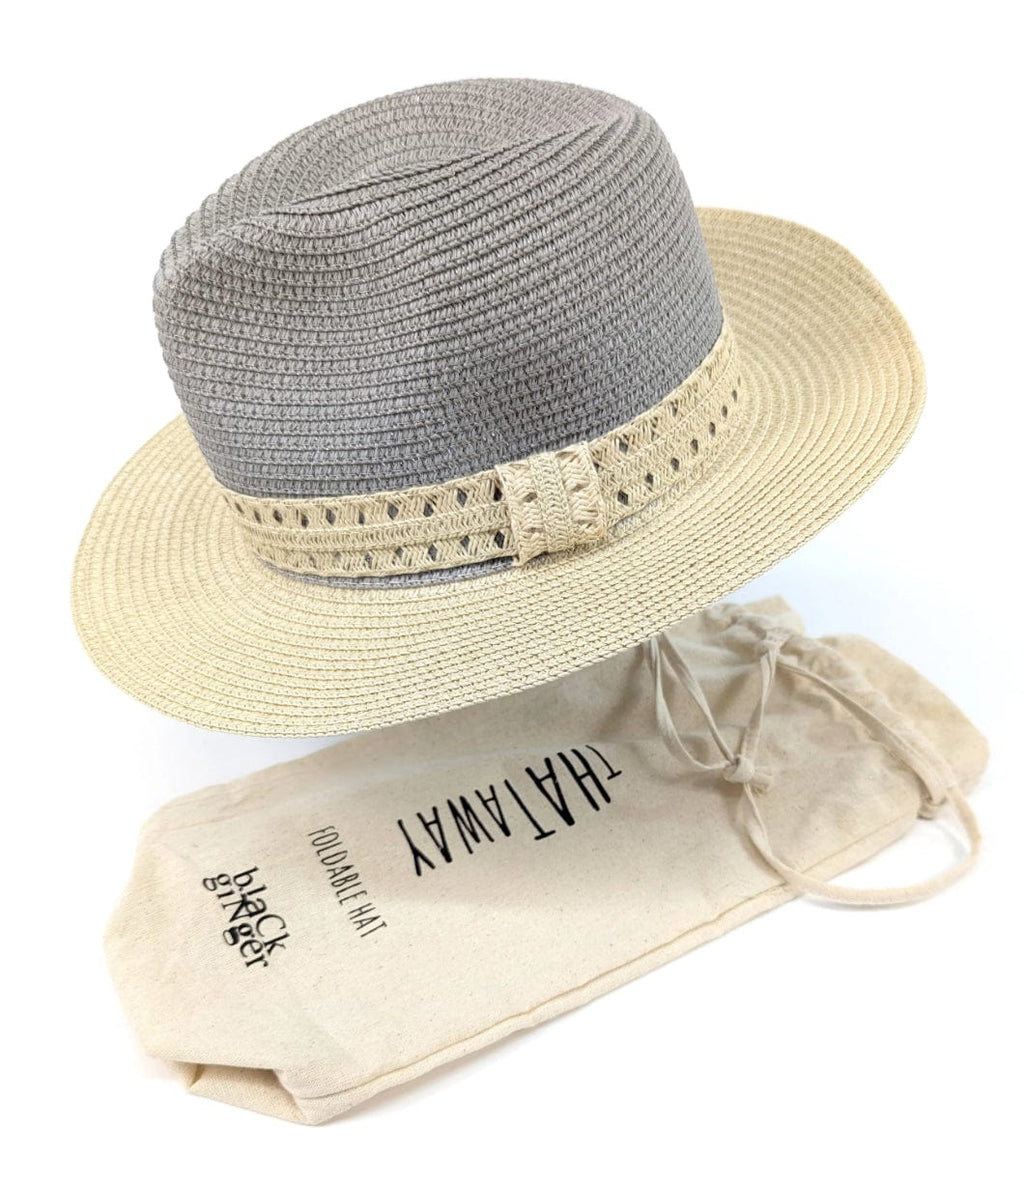 lusciousscarves Vintage Style Packable Panama Hat , Two Tone Grey and Natural , Foldable Travel Hat .